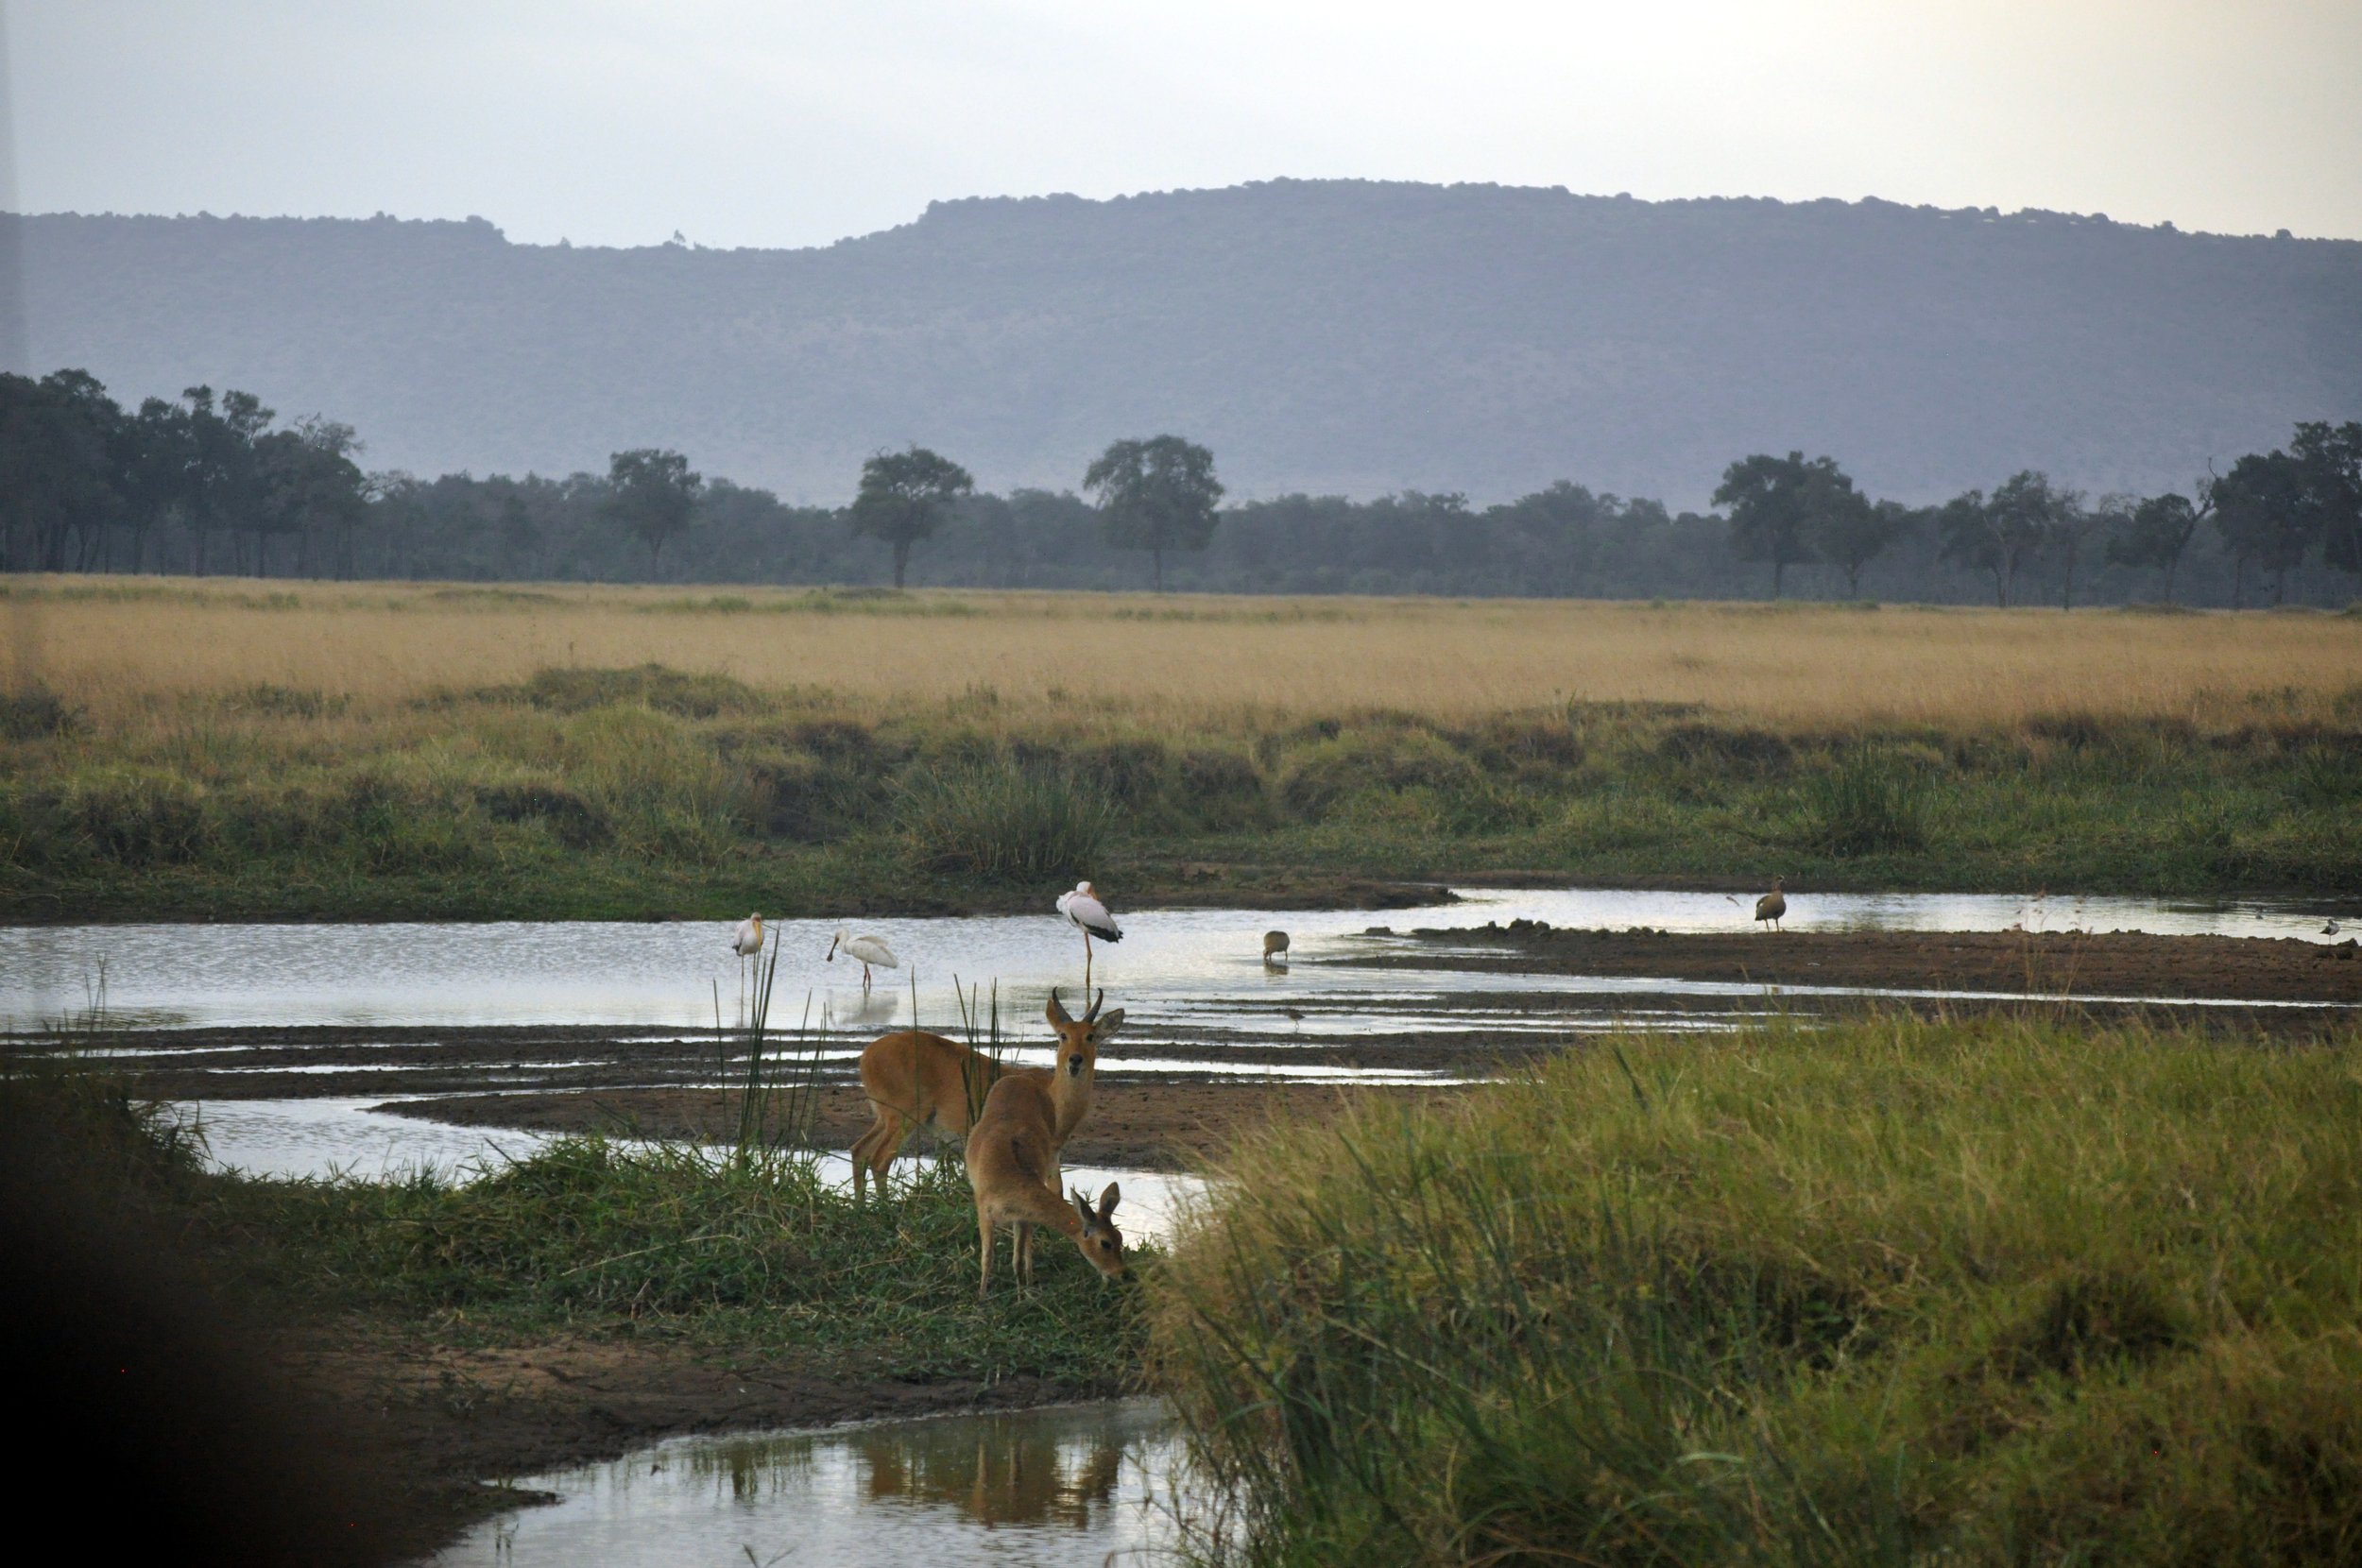 Impala and Birds in the Marsh